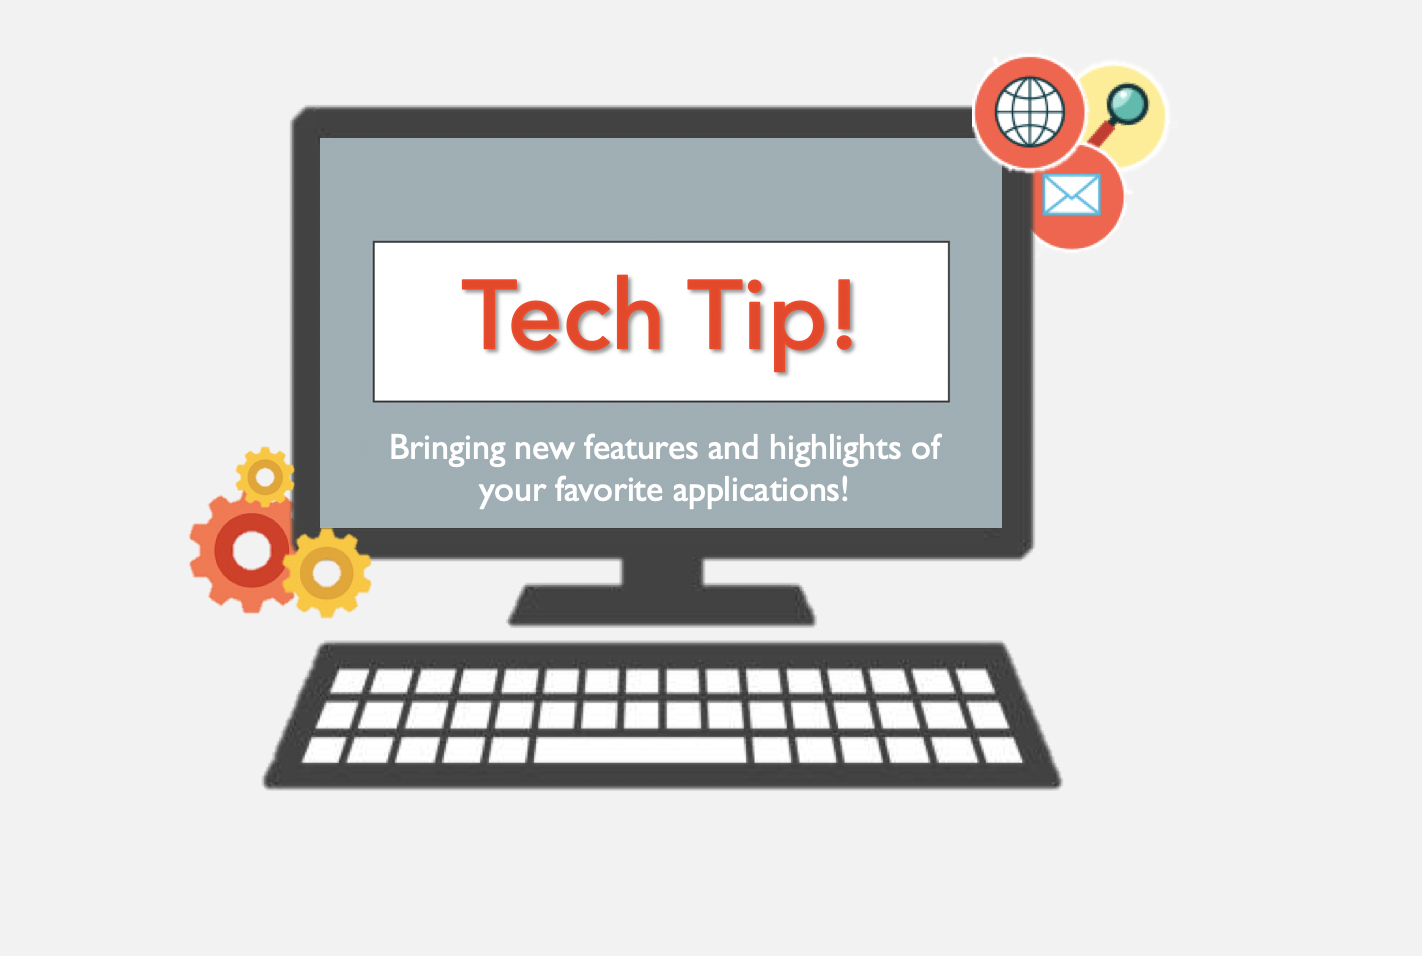 Tech Tip logo; desktop with red and yellow gears in bottom left corner